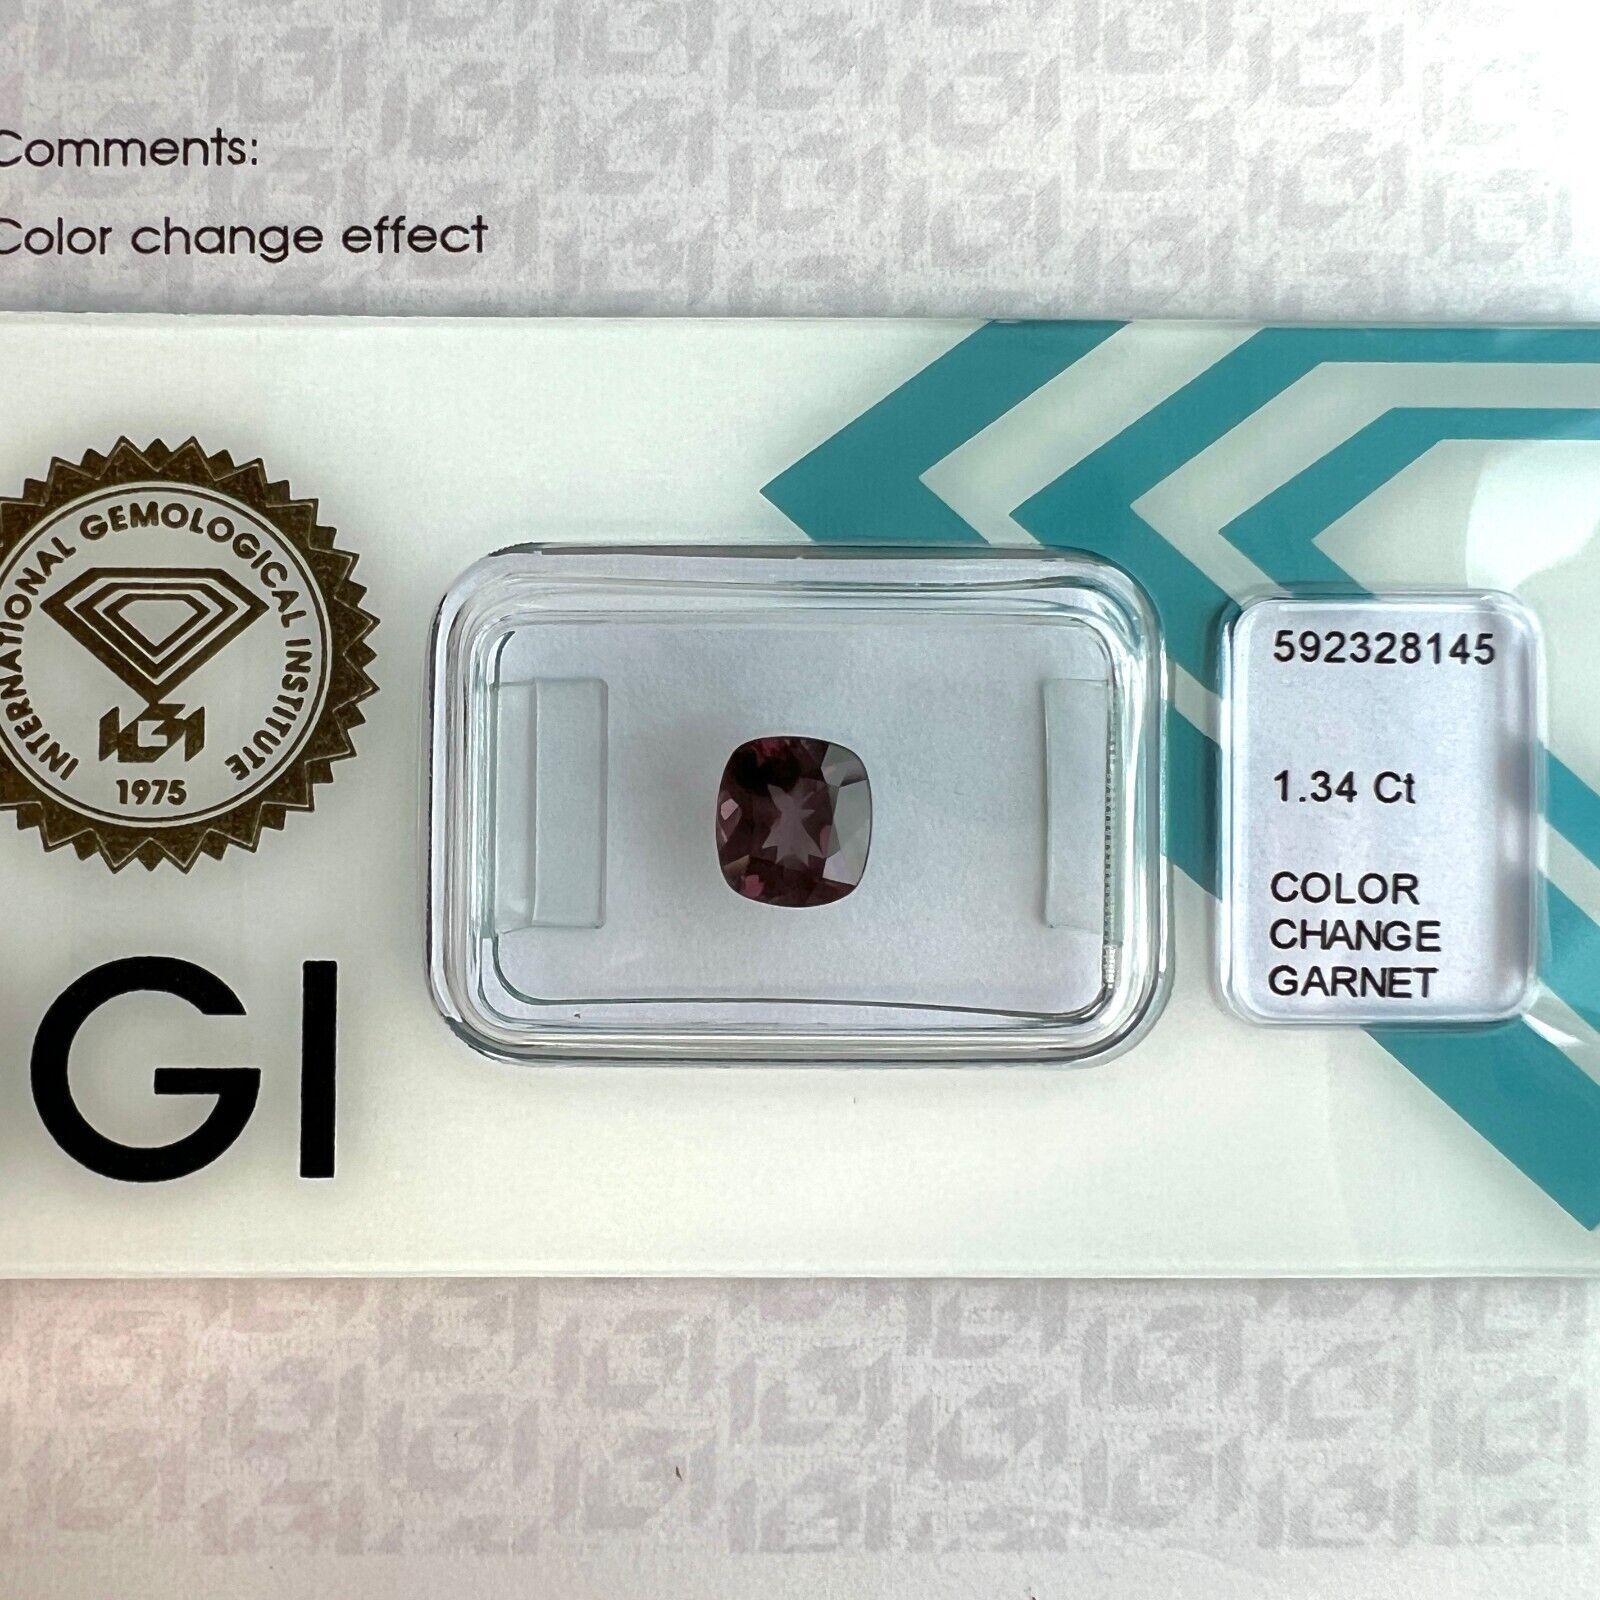 1.34ct Colour Change Garnet Natural Cushion Cut Rare IGI Certified Gemstone

Unique Rare Untreated Colour Change Garnet Gemstone.
1.34 Carat untreated garnet with a rare colour change effect. Changing colour depending on the light its viewed in.